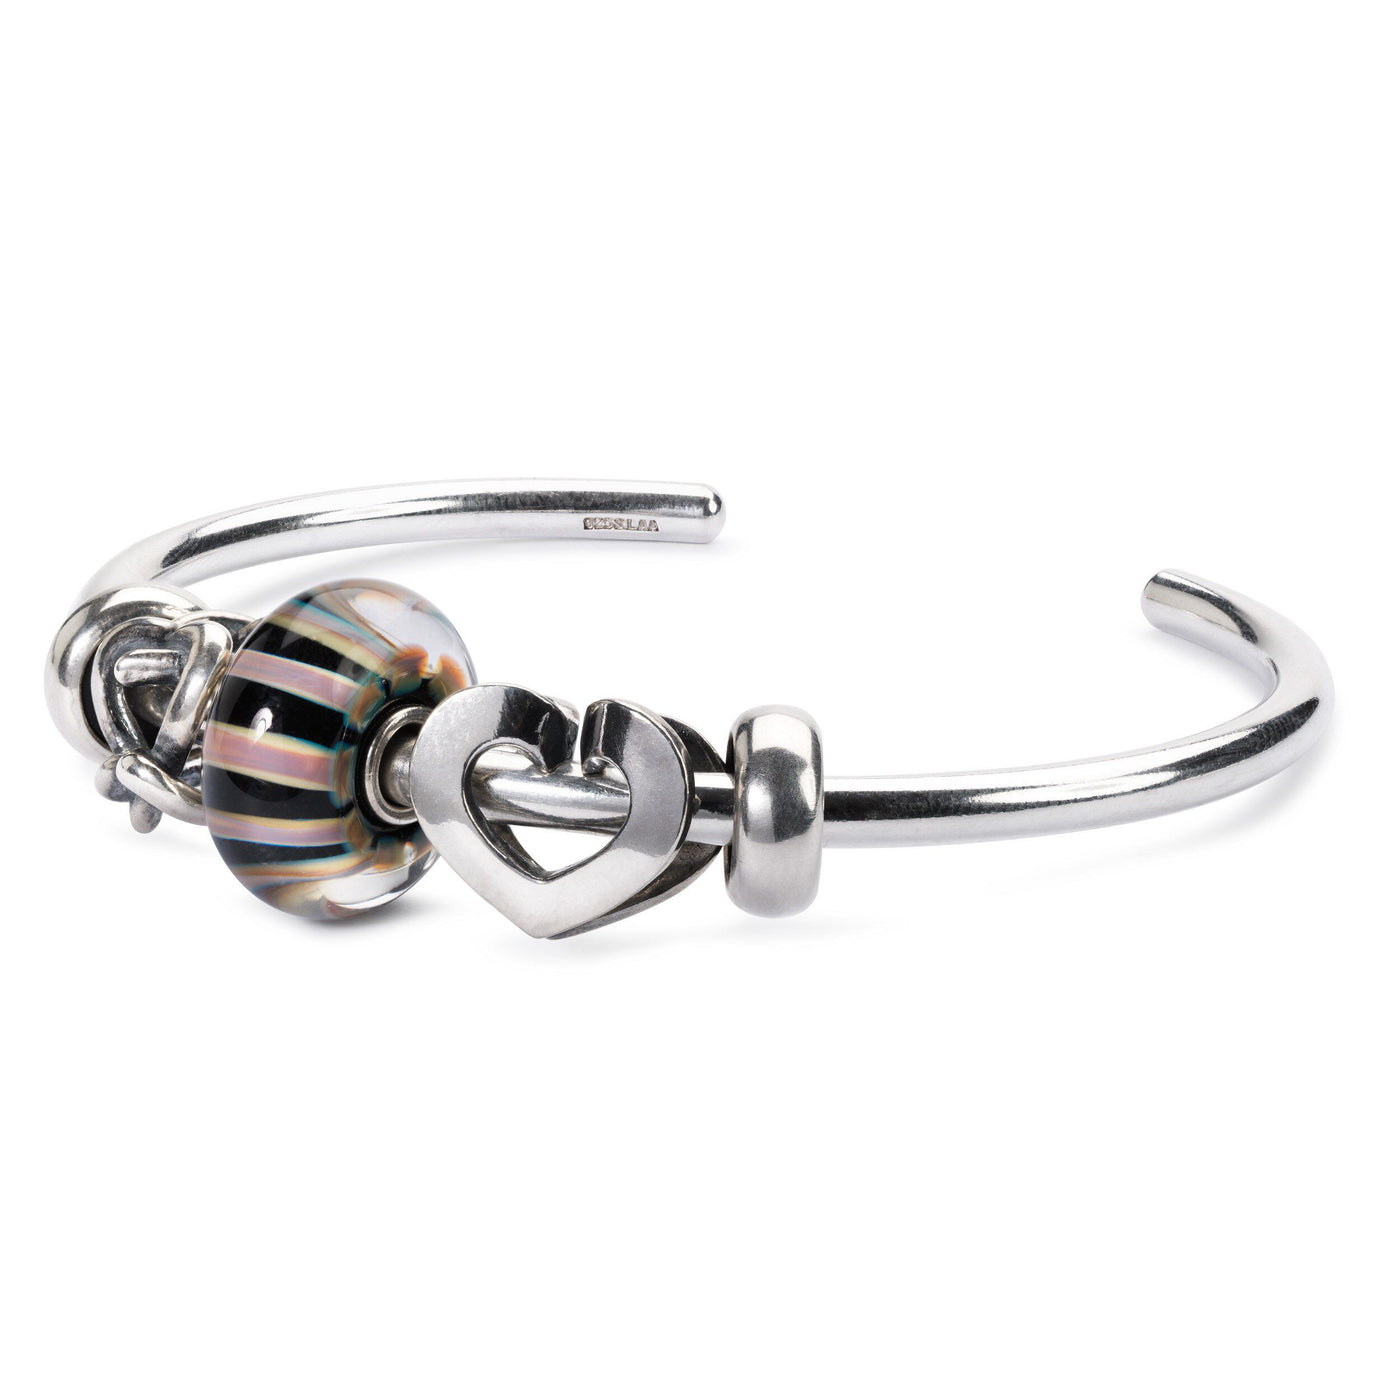 Silver Spacer - Trollbeads Canada